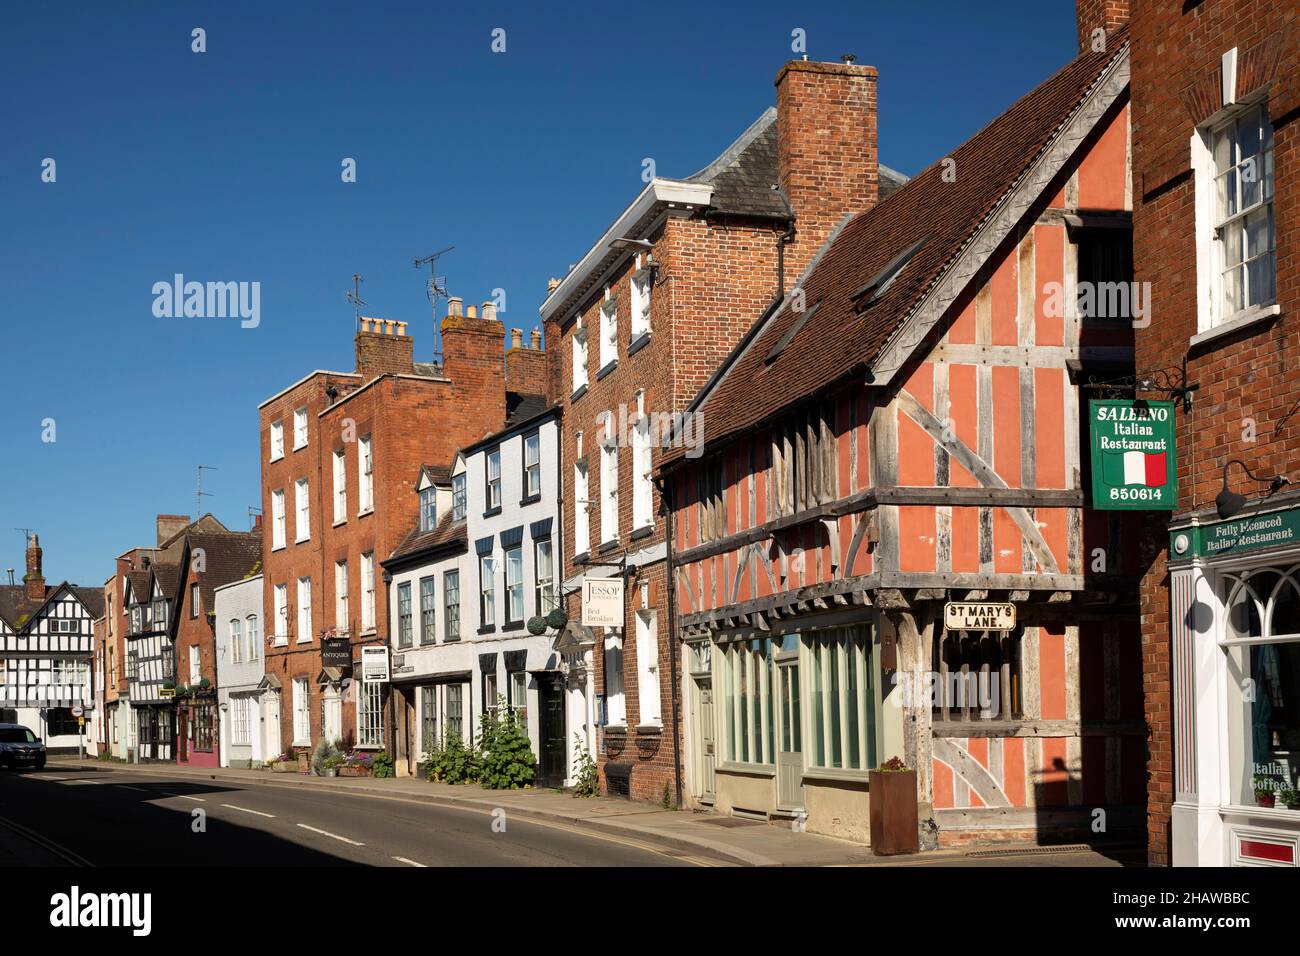 UK, England, Gloucestershire, Tewkesbury, Church Street, historic jettied timber framed house at corner of St Mary’s Lane Stock Photo